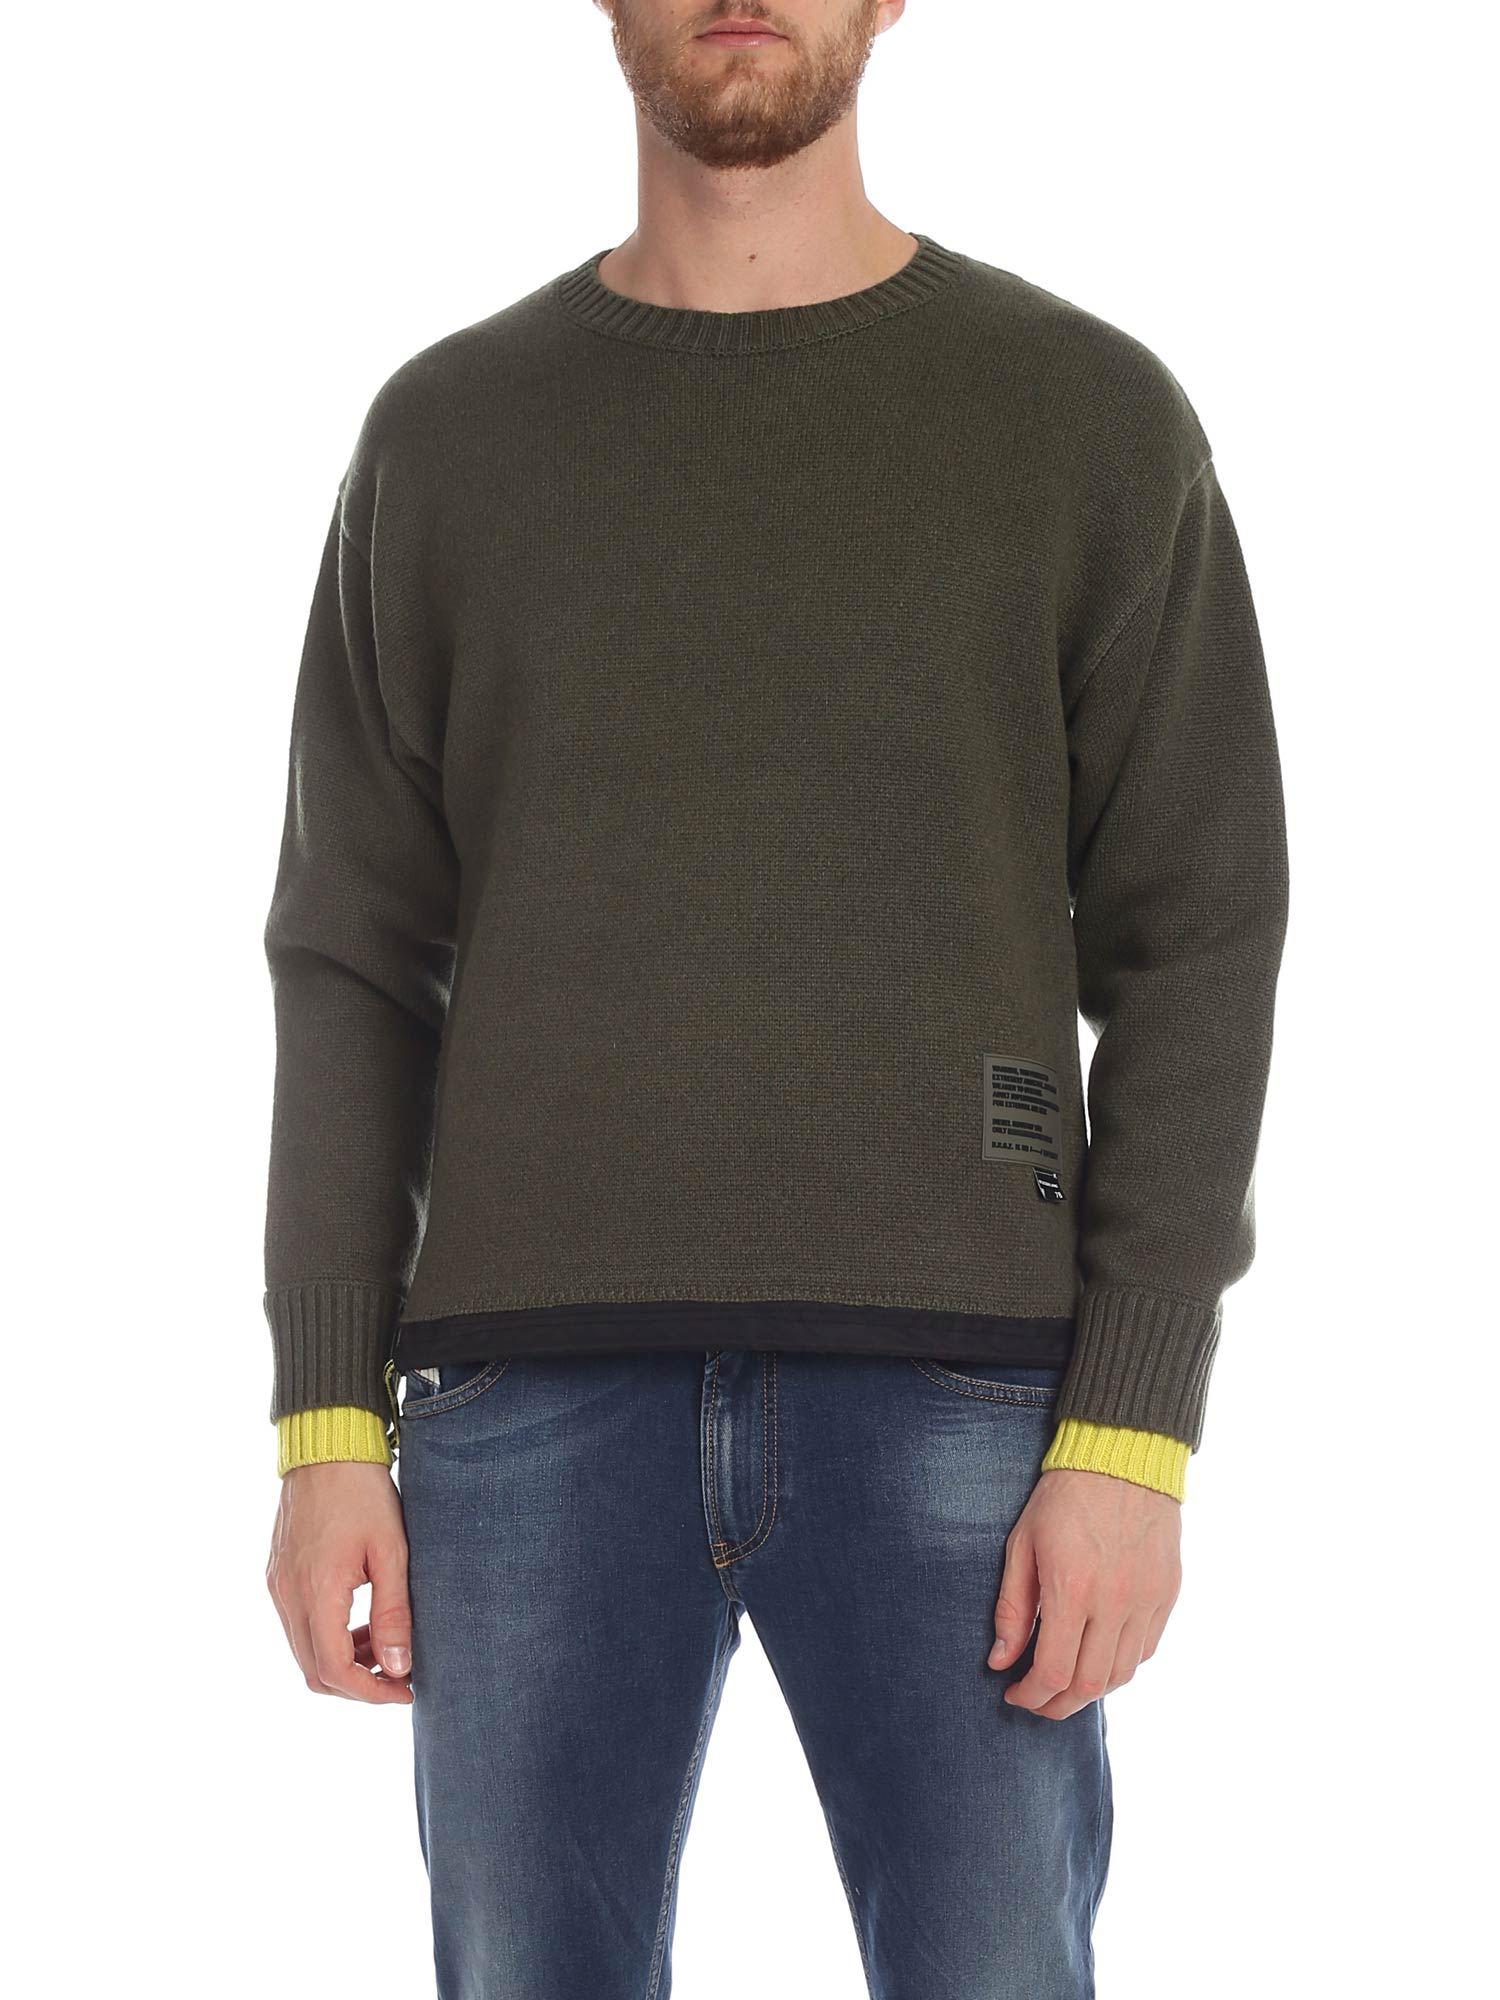 DIESEL Wool K Pilot Pullover In Army Green Color for Men - Lyst